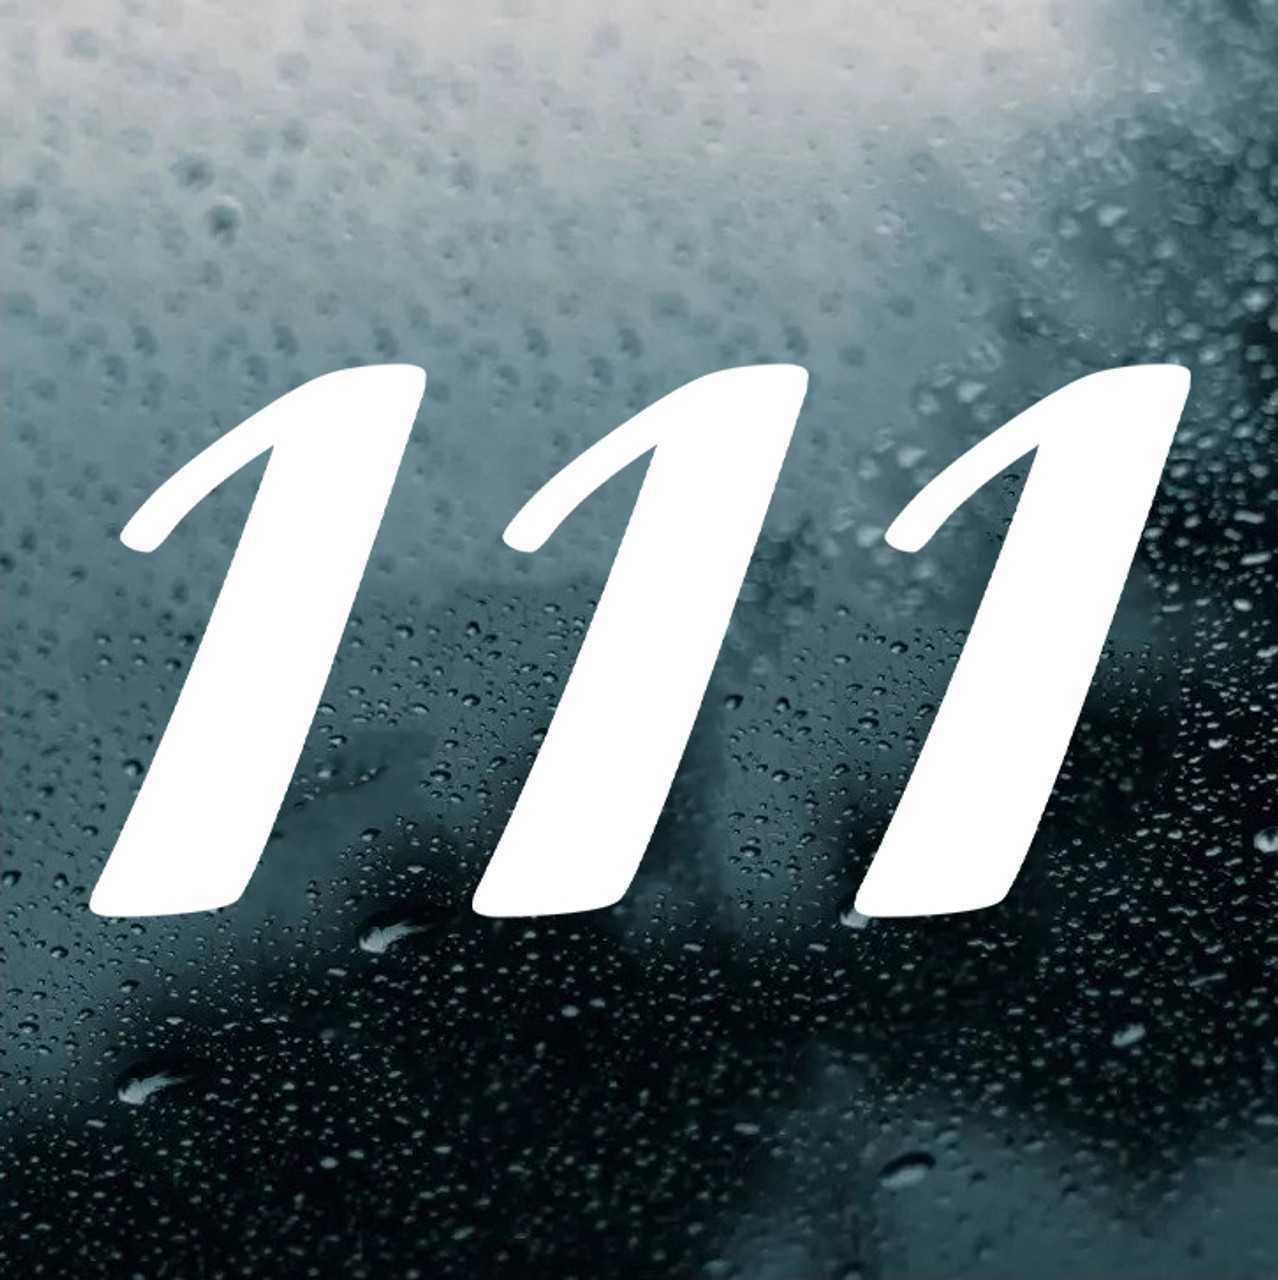 111 Angel Number Vinyl Decal - Intuition Alignment Numerology - Die Cut Sticker